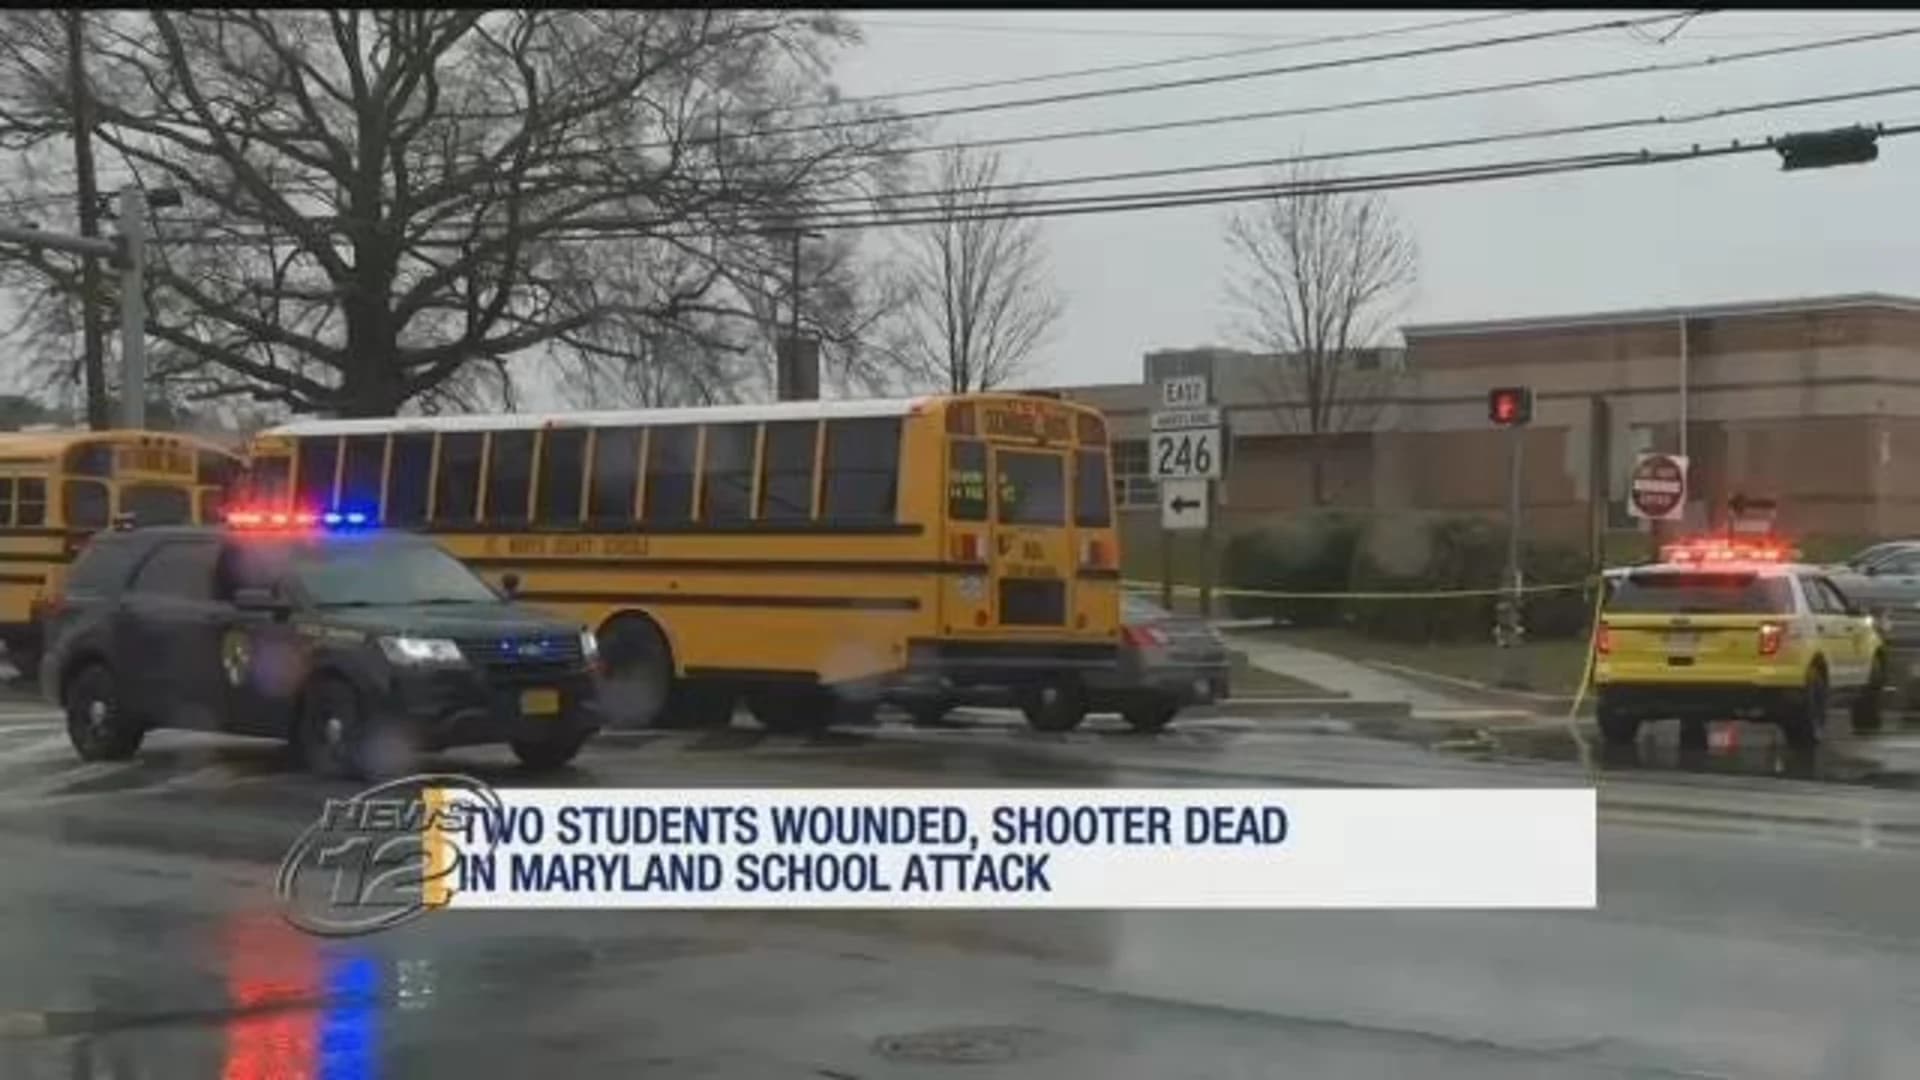 Teen shoots girl in Maryland school, killed in confrontation